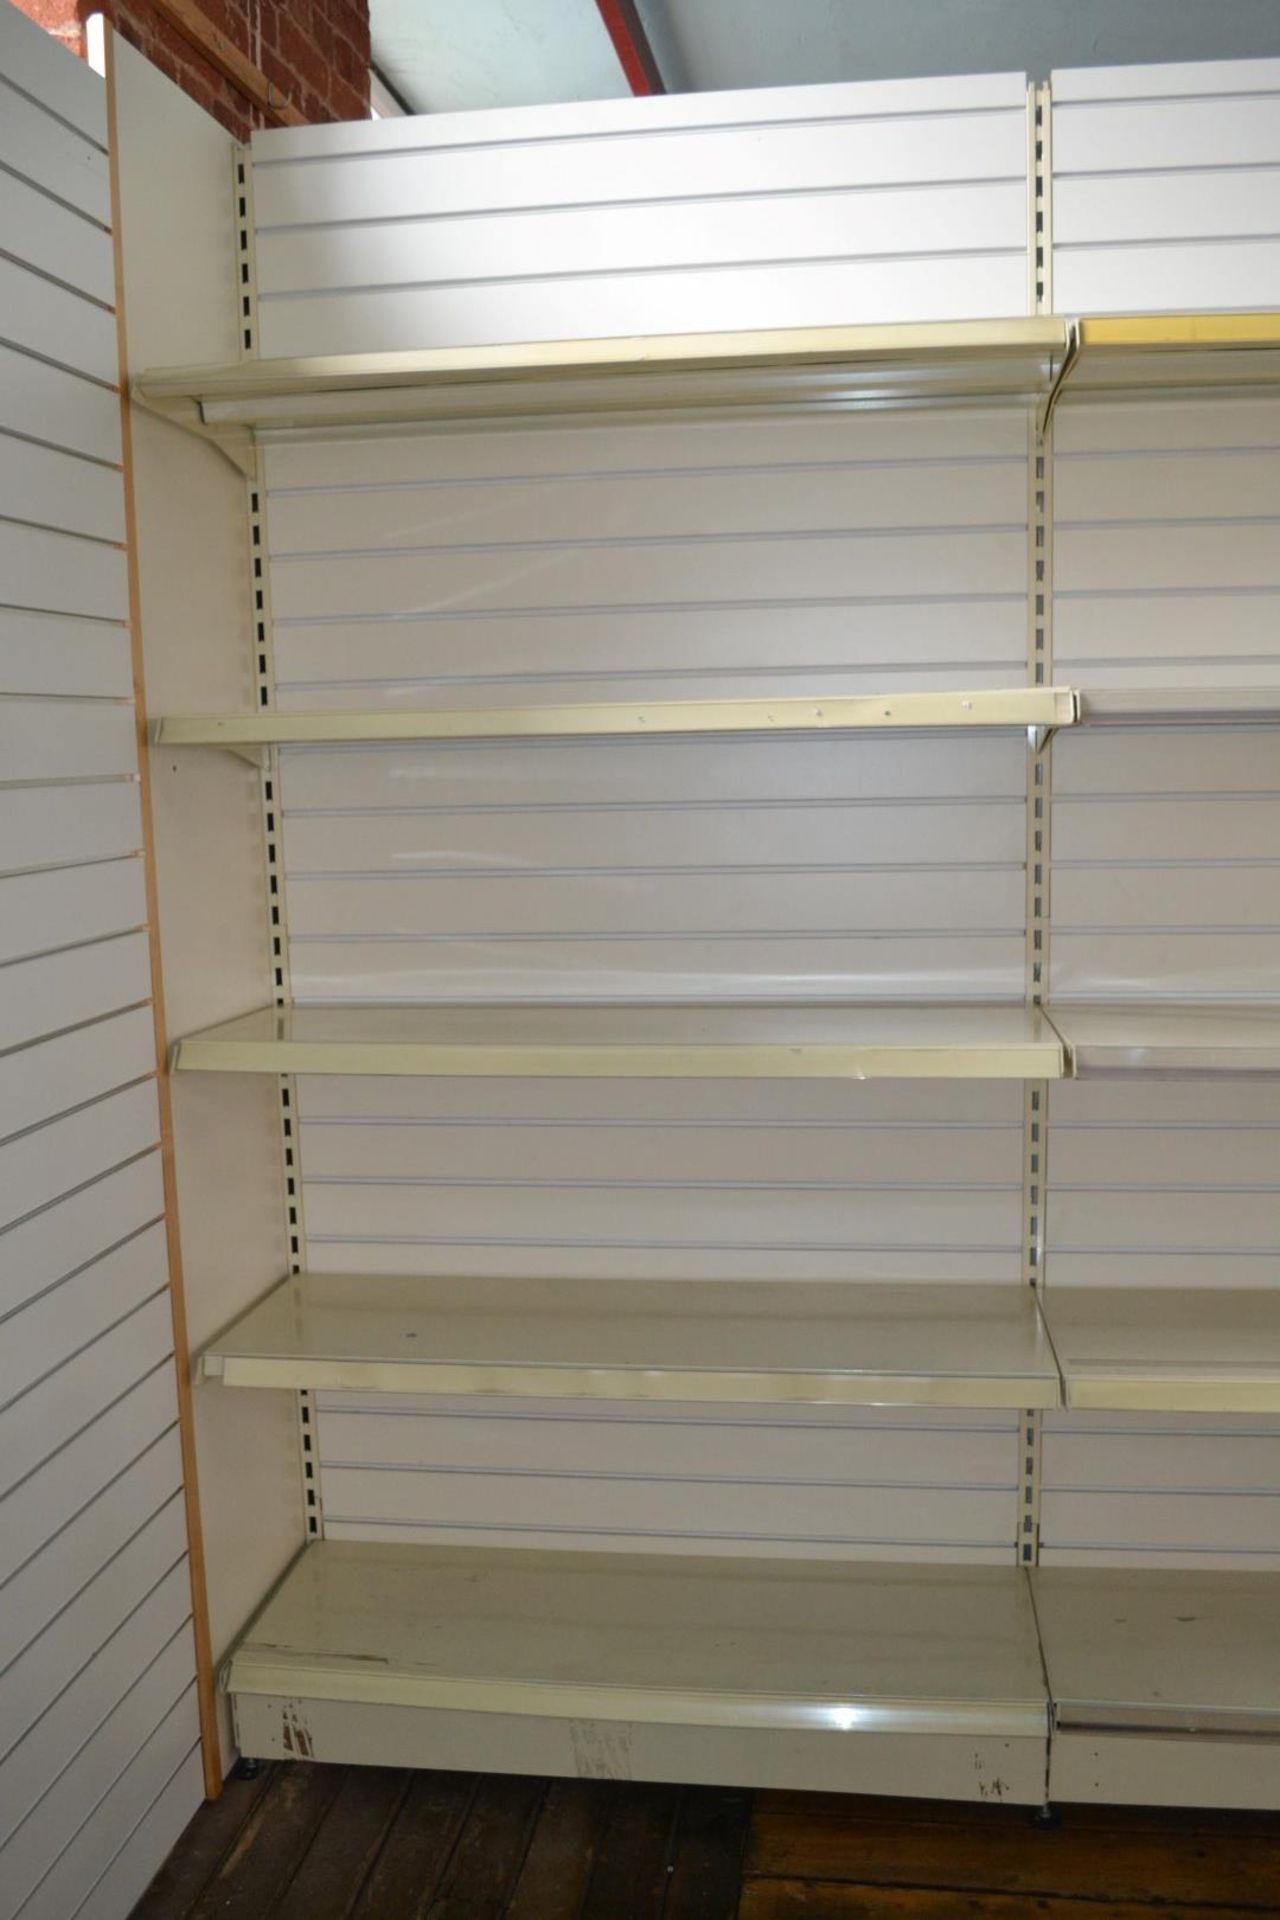 1 x Slatwall With Shelving - Approx. Total Dimensions: W480cm x H249cm - Buyer To Remove - Image 2 of 6